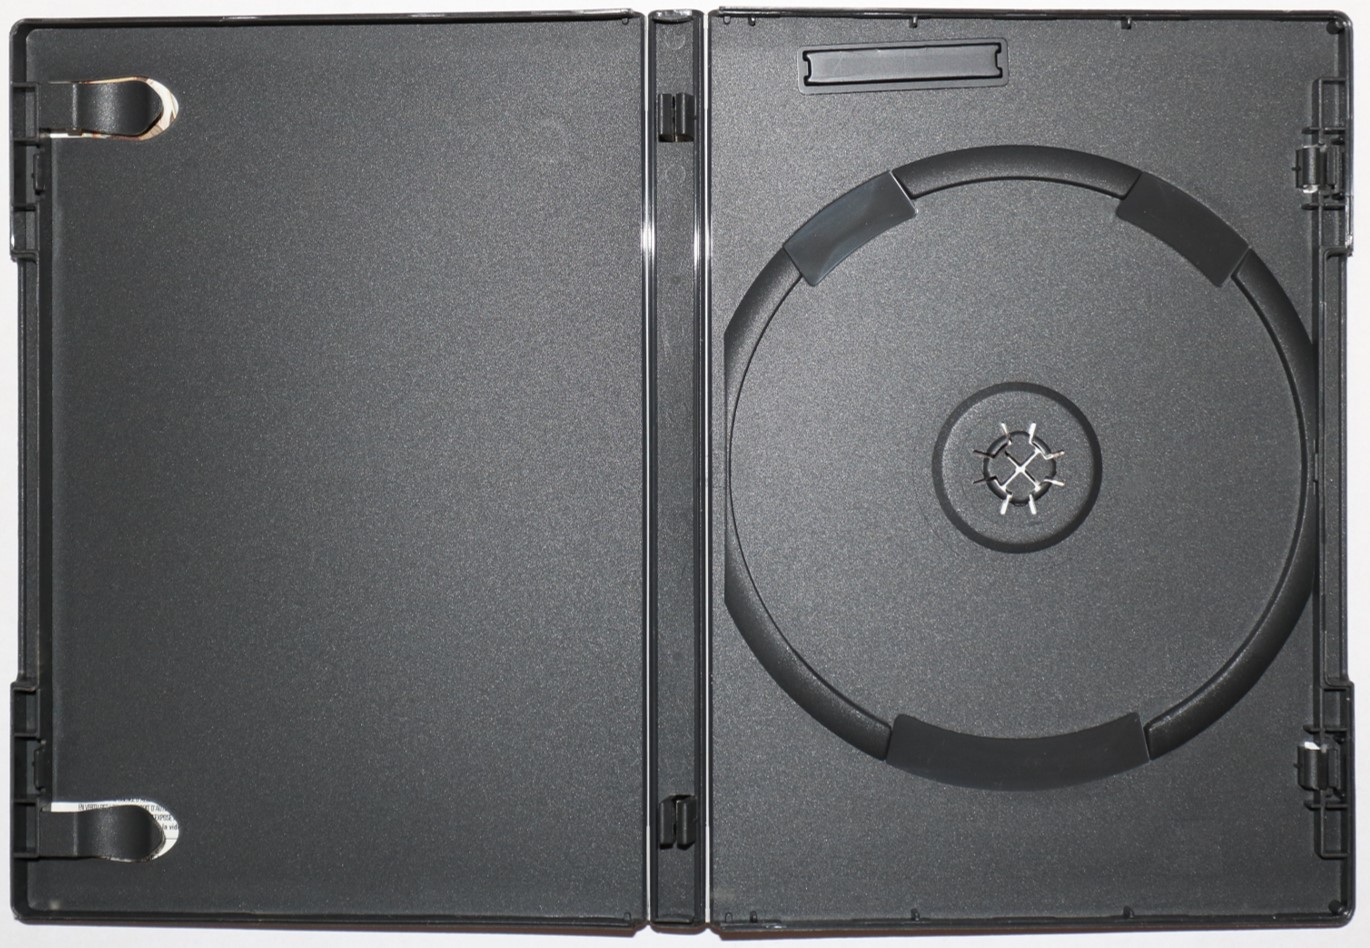 An Amaray case for storing DVDs and Blu-ray movie discs. The case is a one-piece construction, same thickness as a standard jewel case, and made out of polypropylene, making the case less brittle.